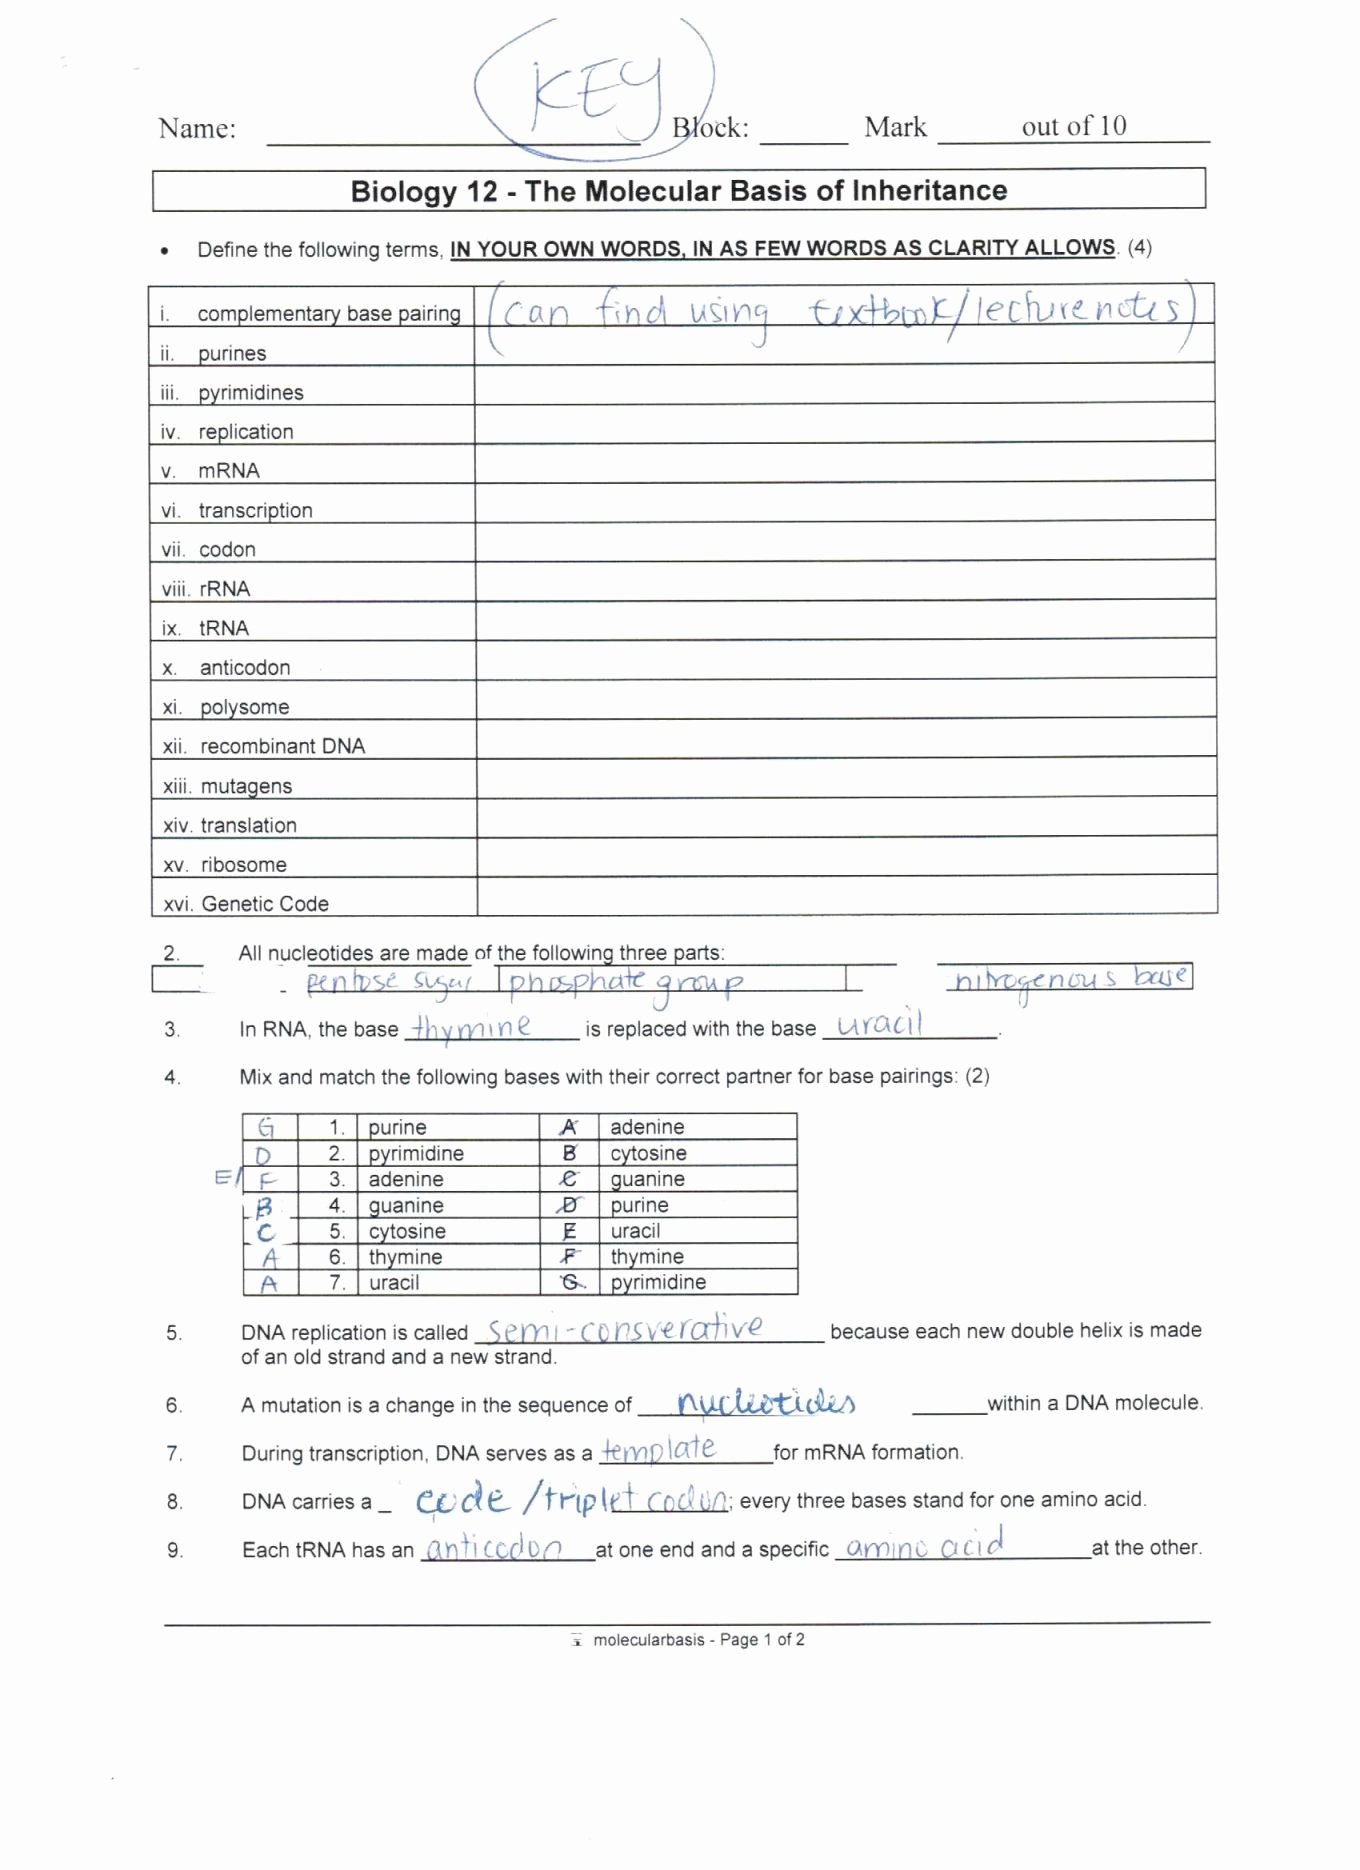 Dna Mutation Practice Worksheet Answers Beautiful Dna Mutations Practice Worksheet Conclusion Answers